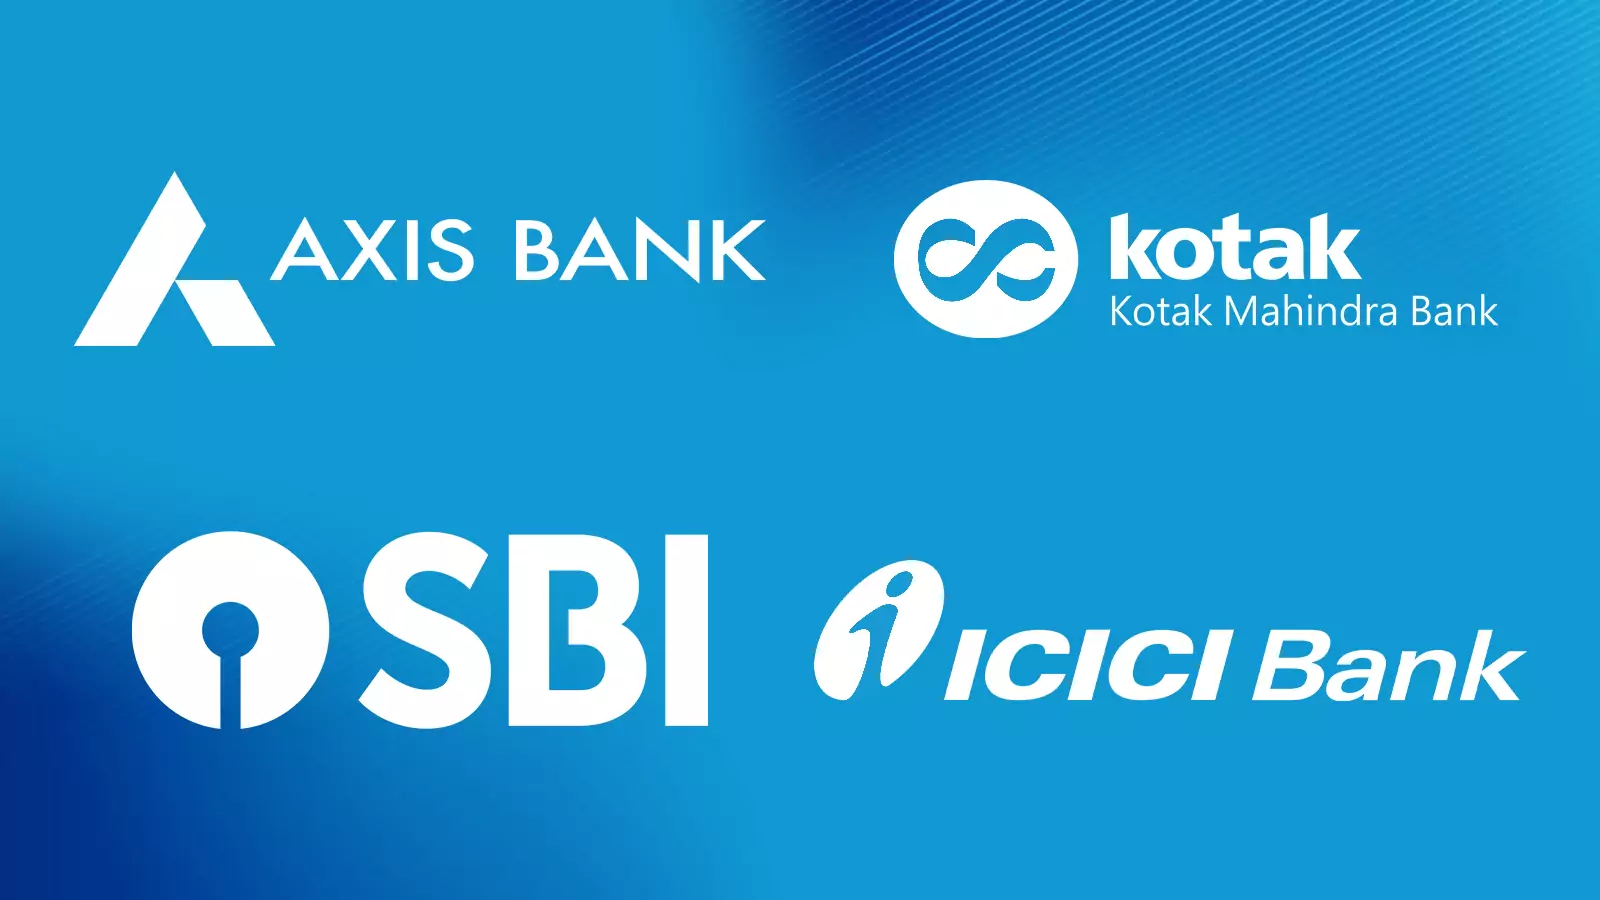 Almost all the modern Indian banks cooperate with PayTM so you can use it as the main deposit method at cricket betting sites.